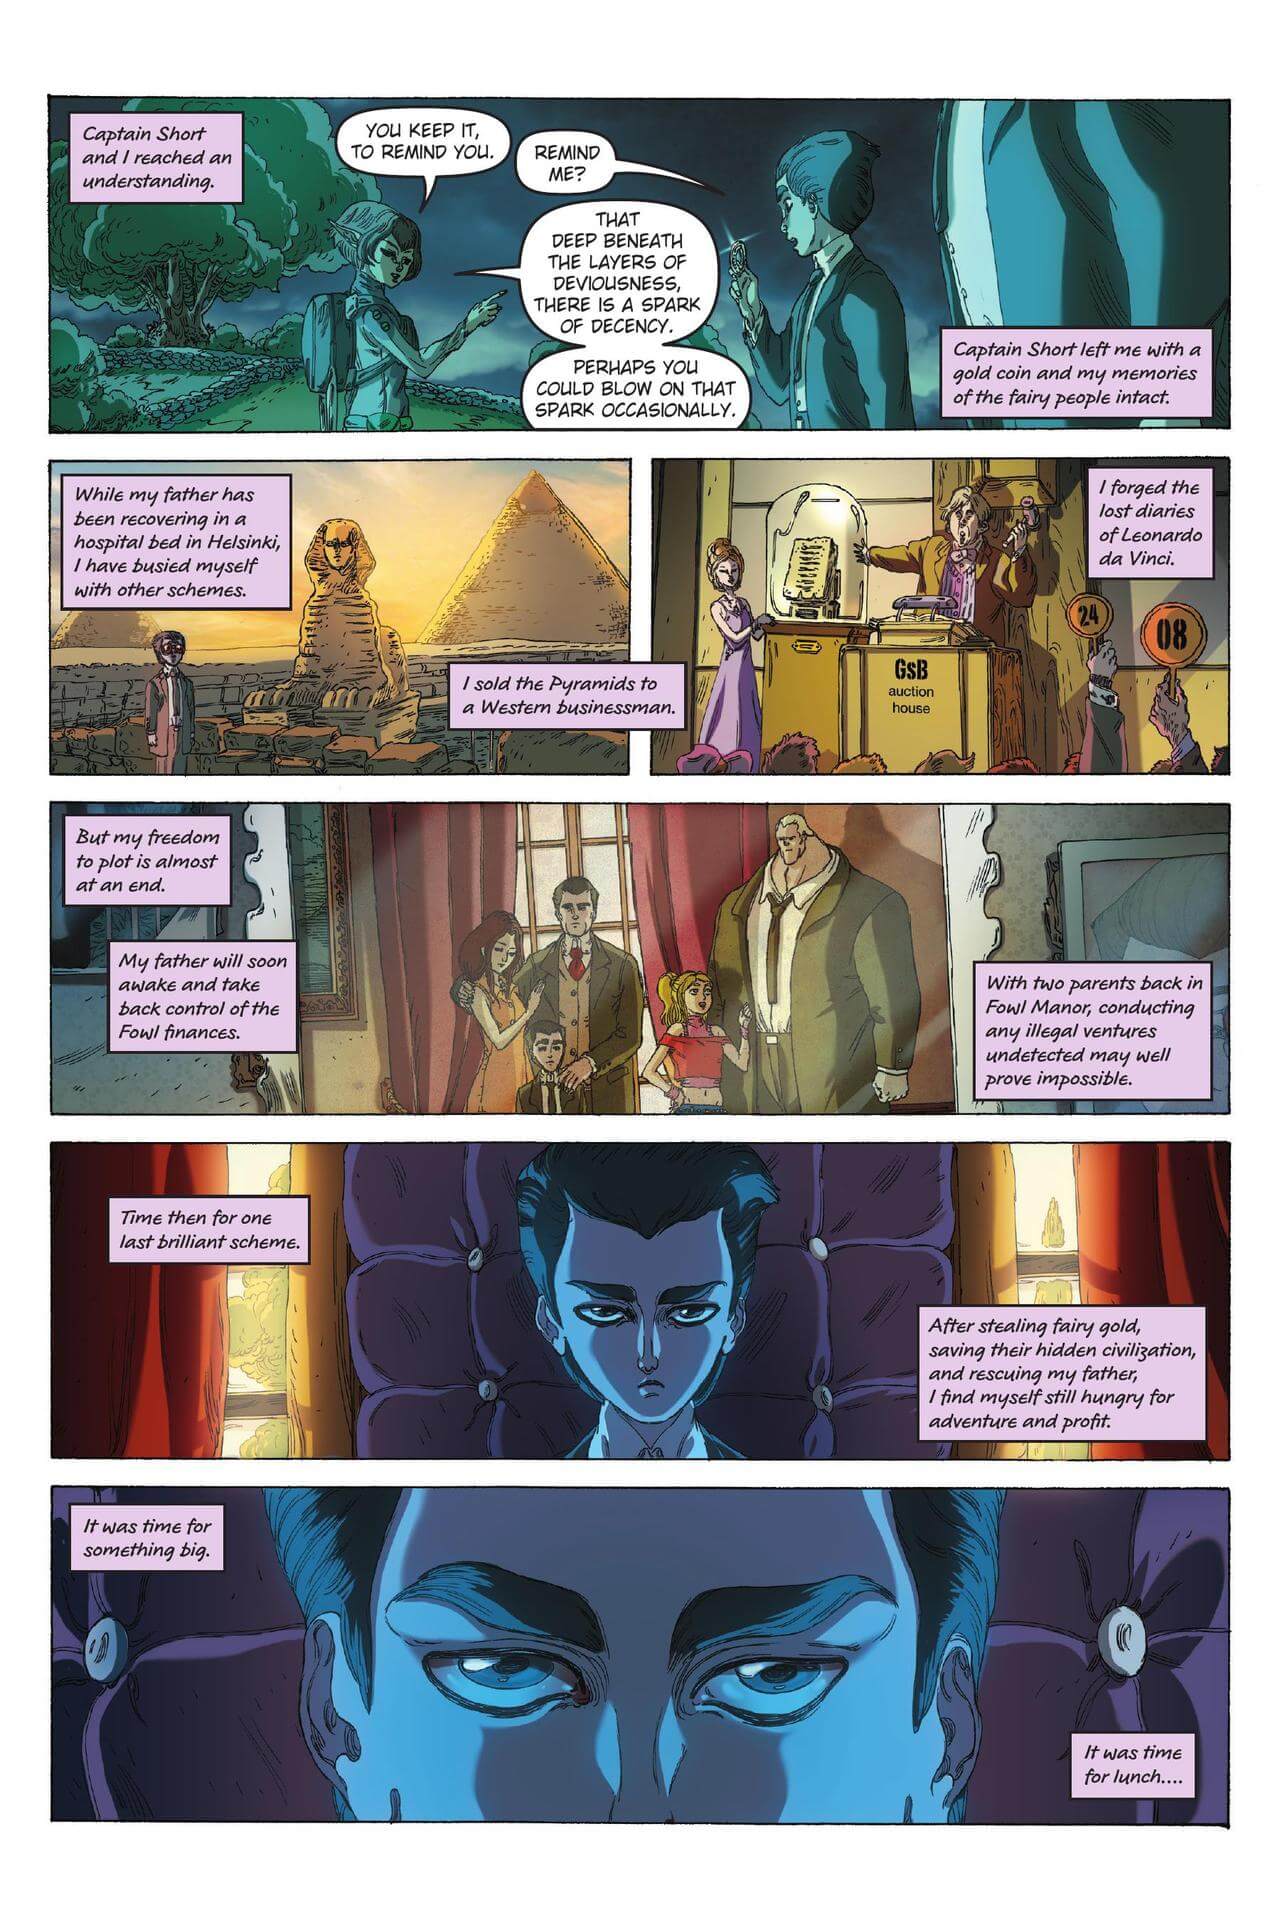 page 3 of artemis fowl eternity code graphic novel